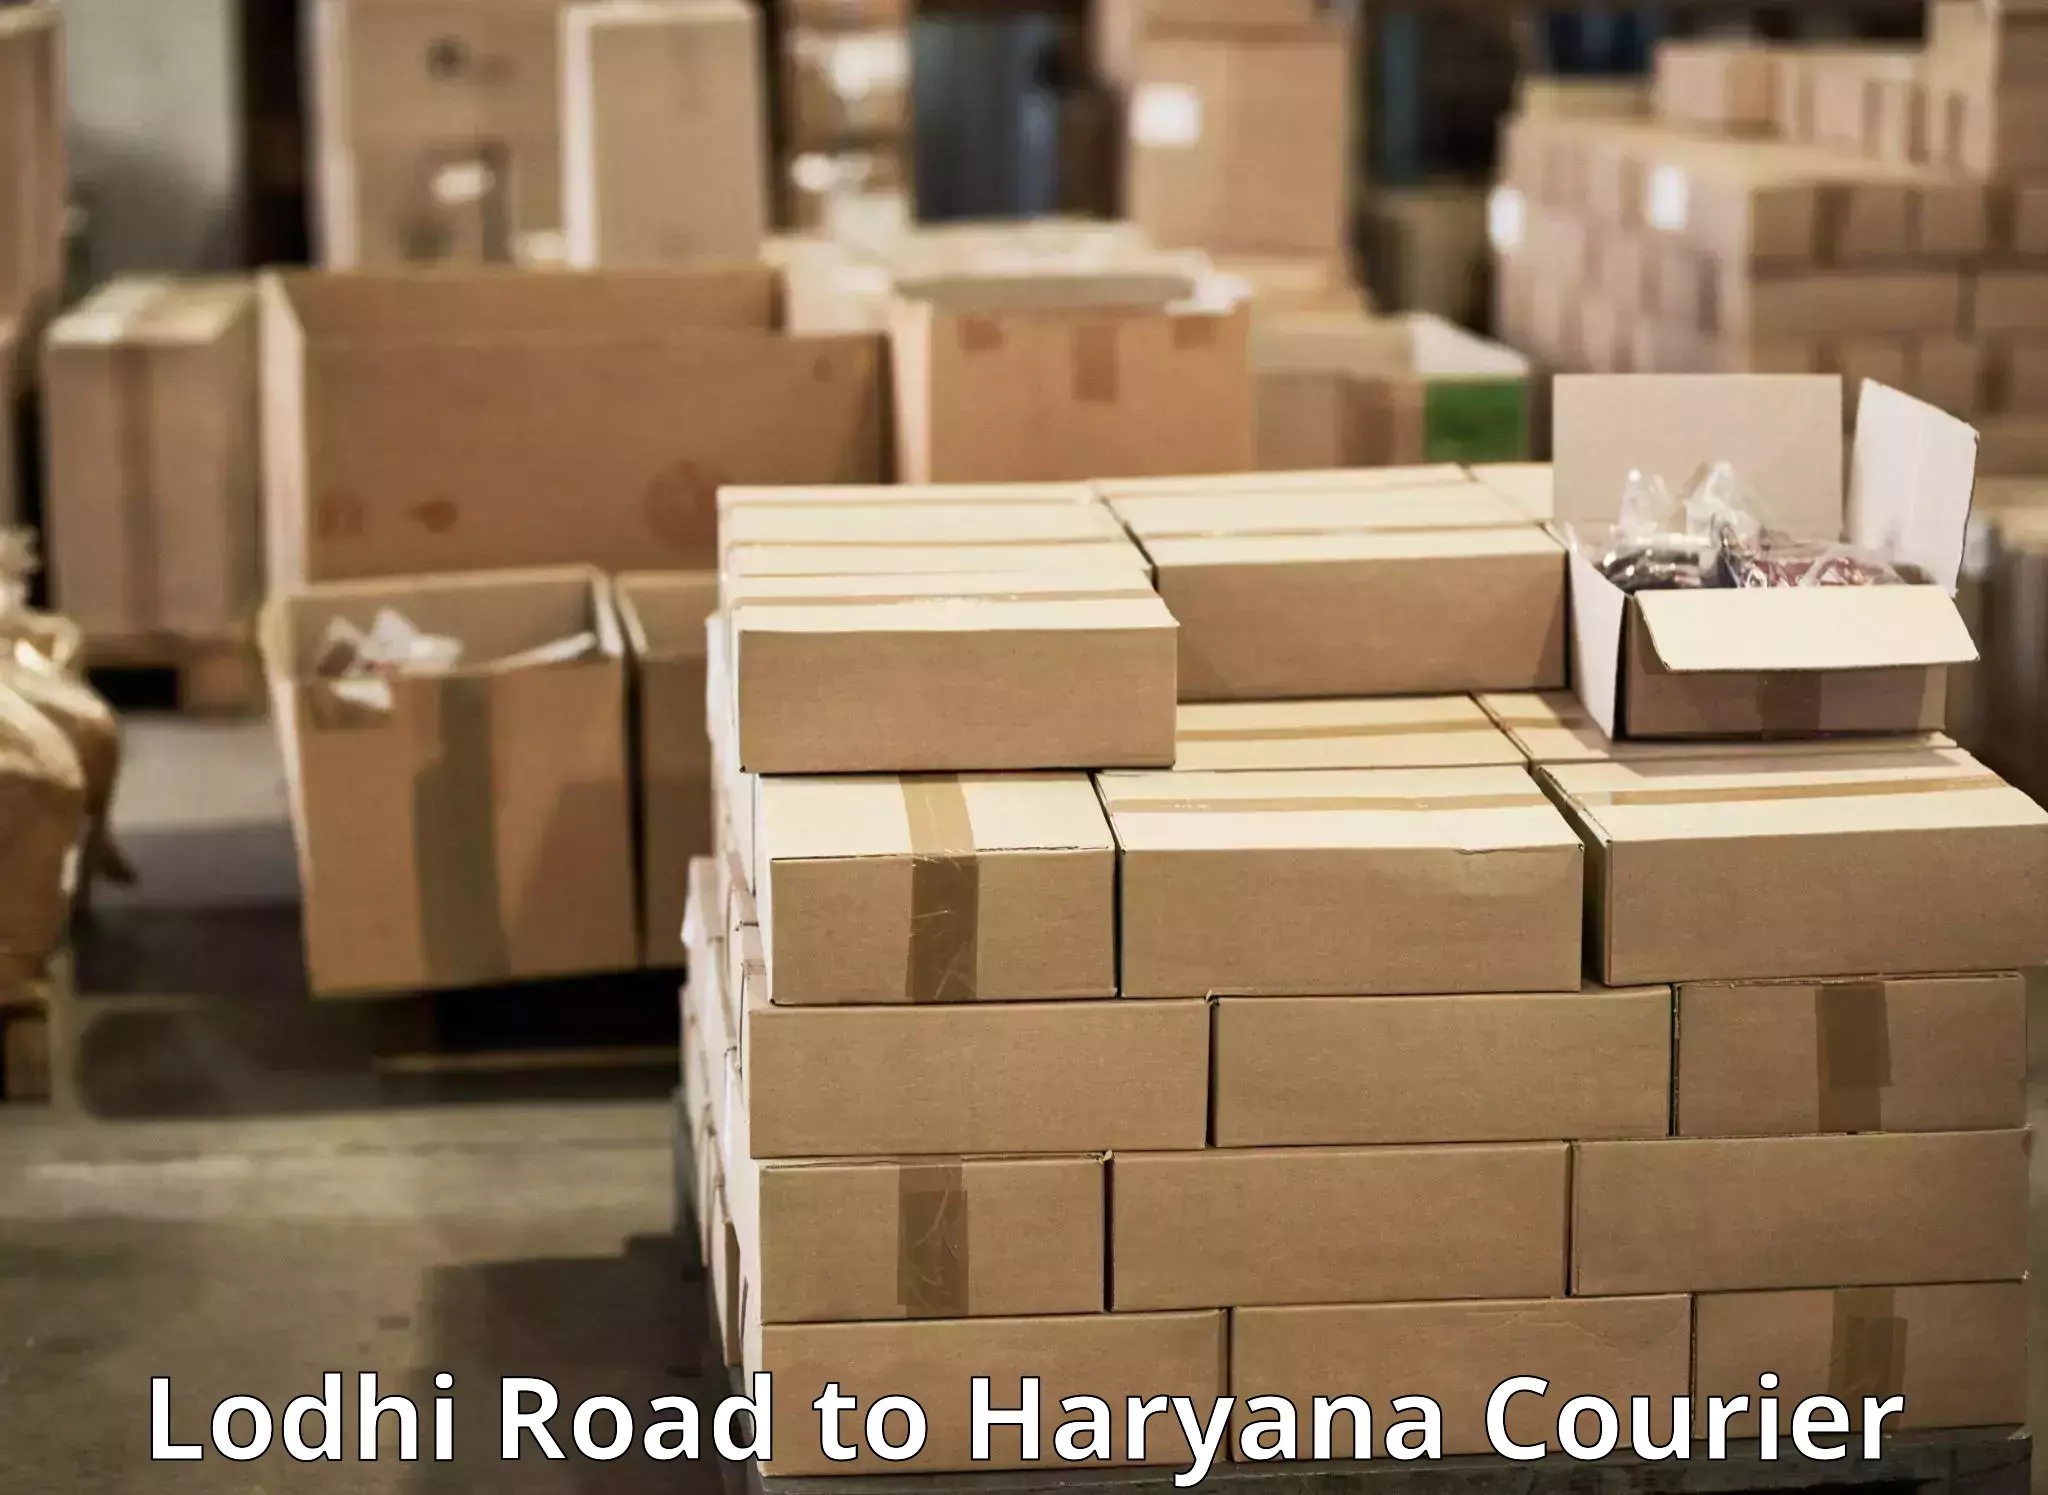 Urgent courier needs in Lodhi Road to Siwani